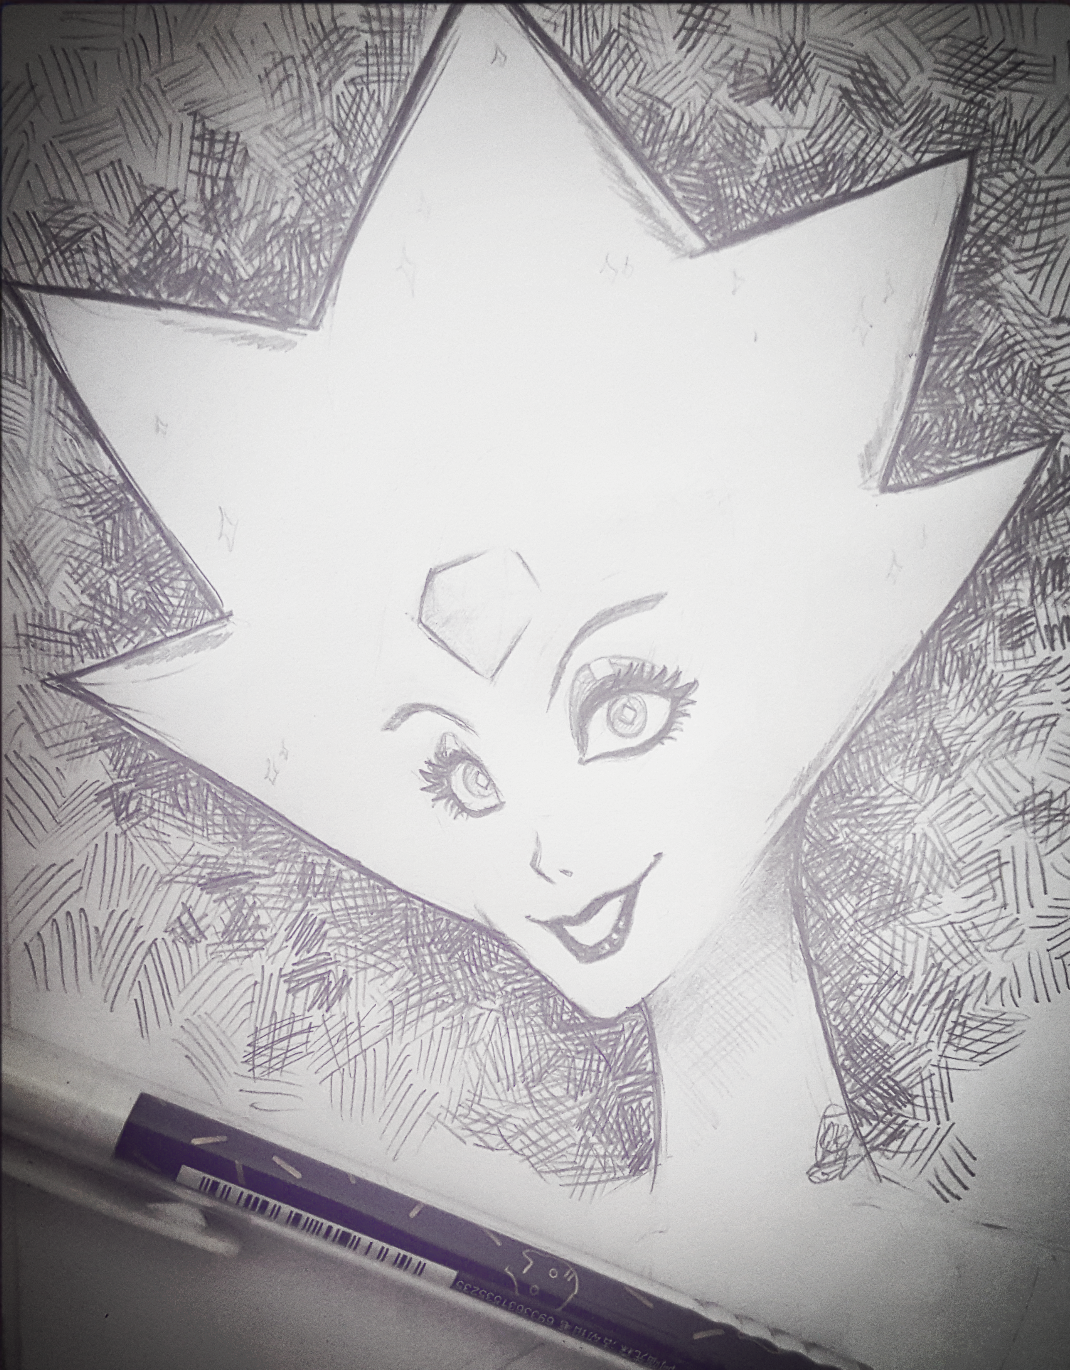 A sketch of white Diamond! Will be drawing a digital piece of her real soon 😊